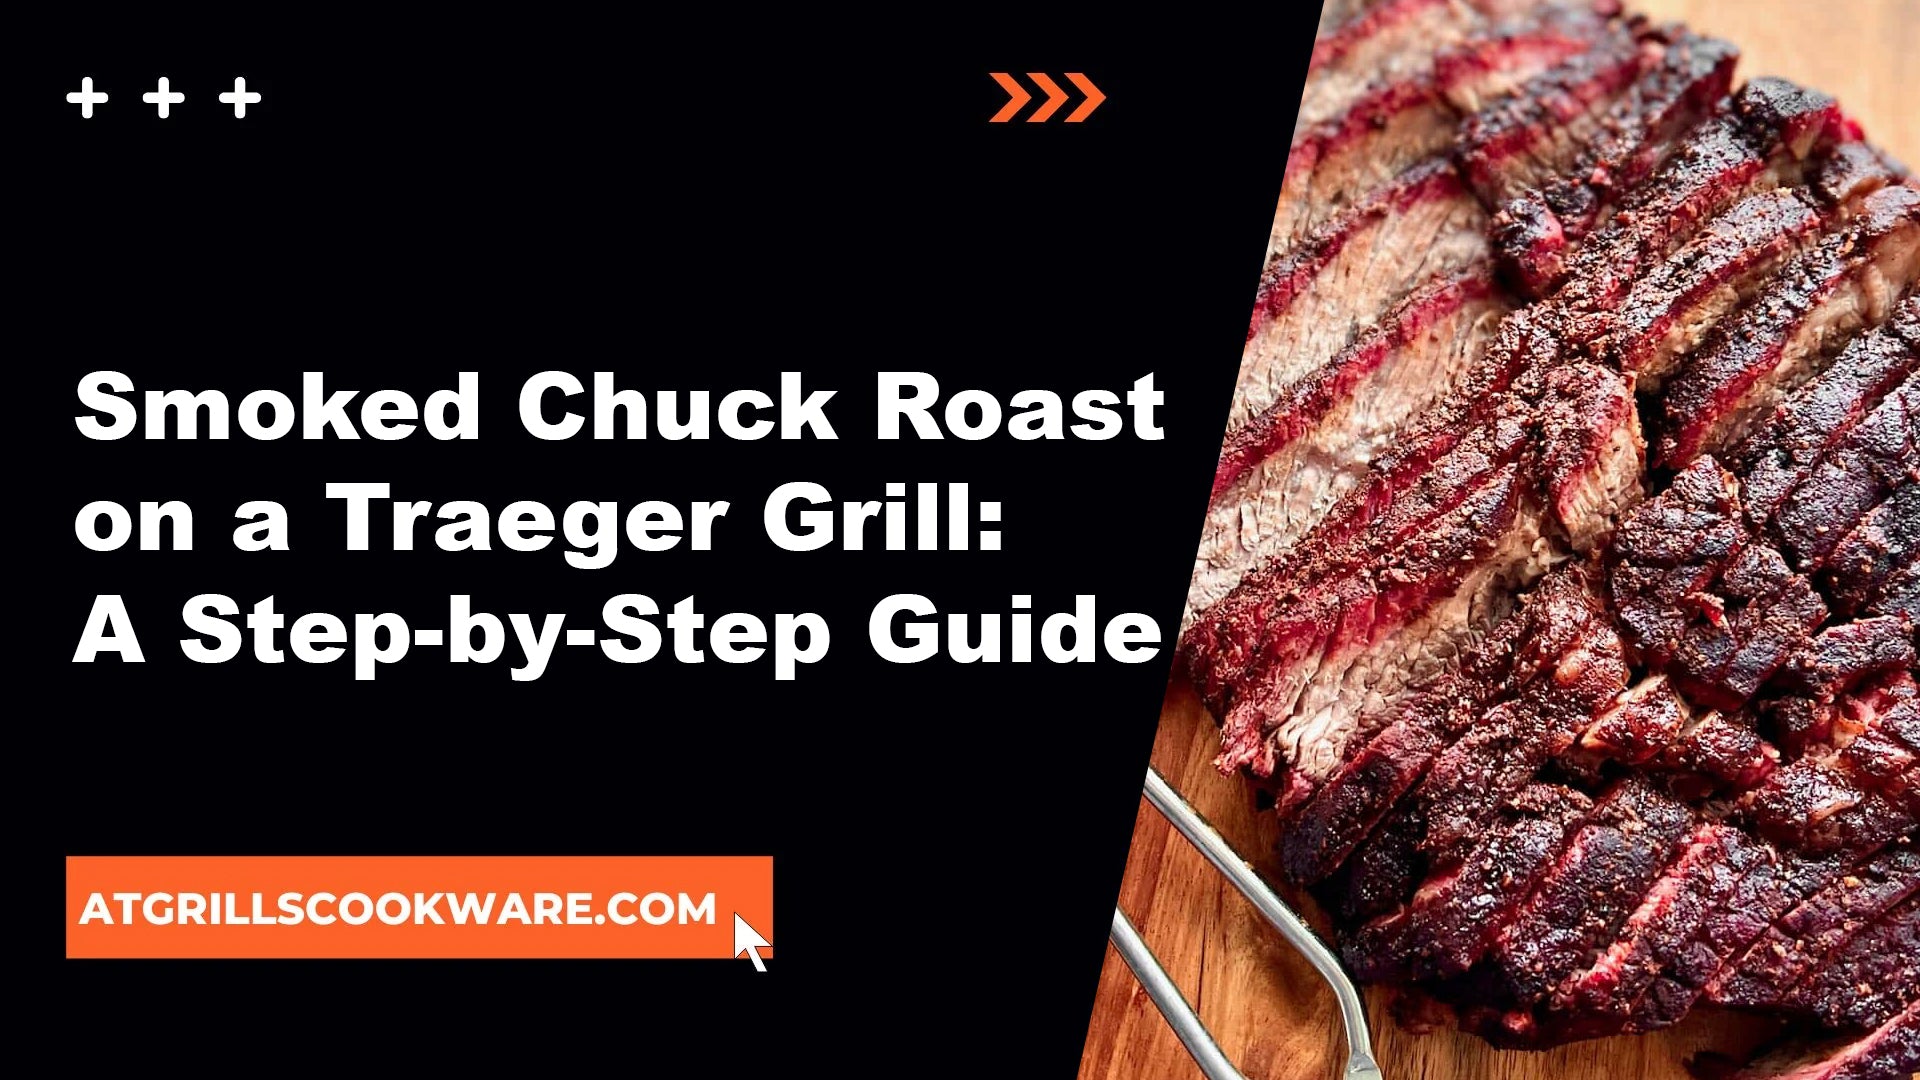 Smoked Chuck Roast on a Traeger Grill: A Step-by-Step Guide